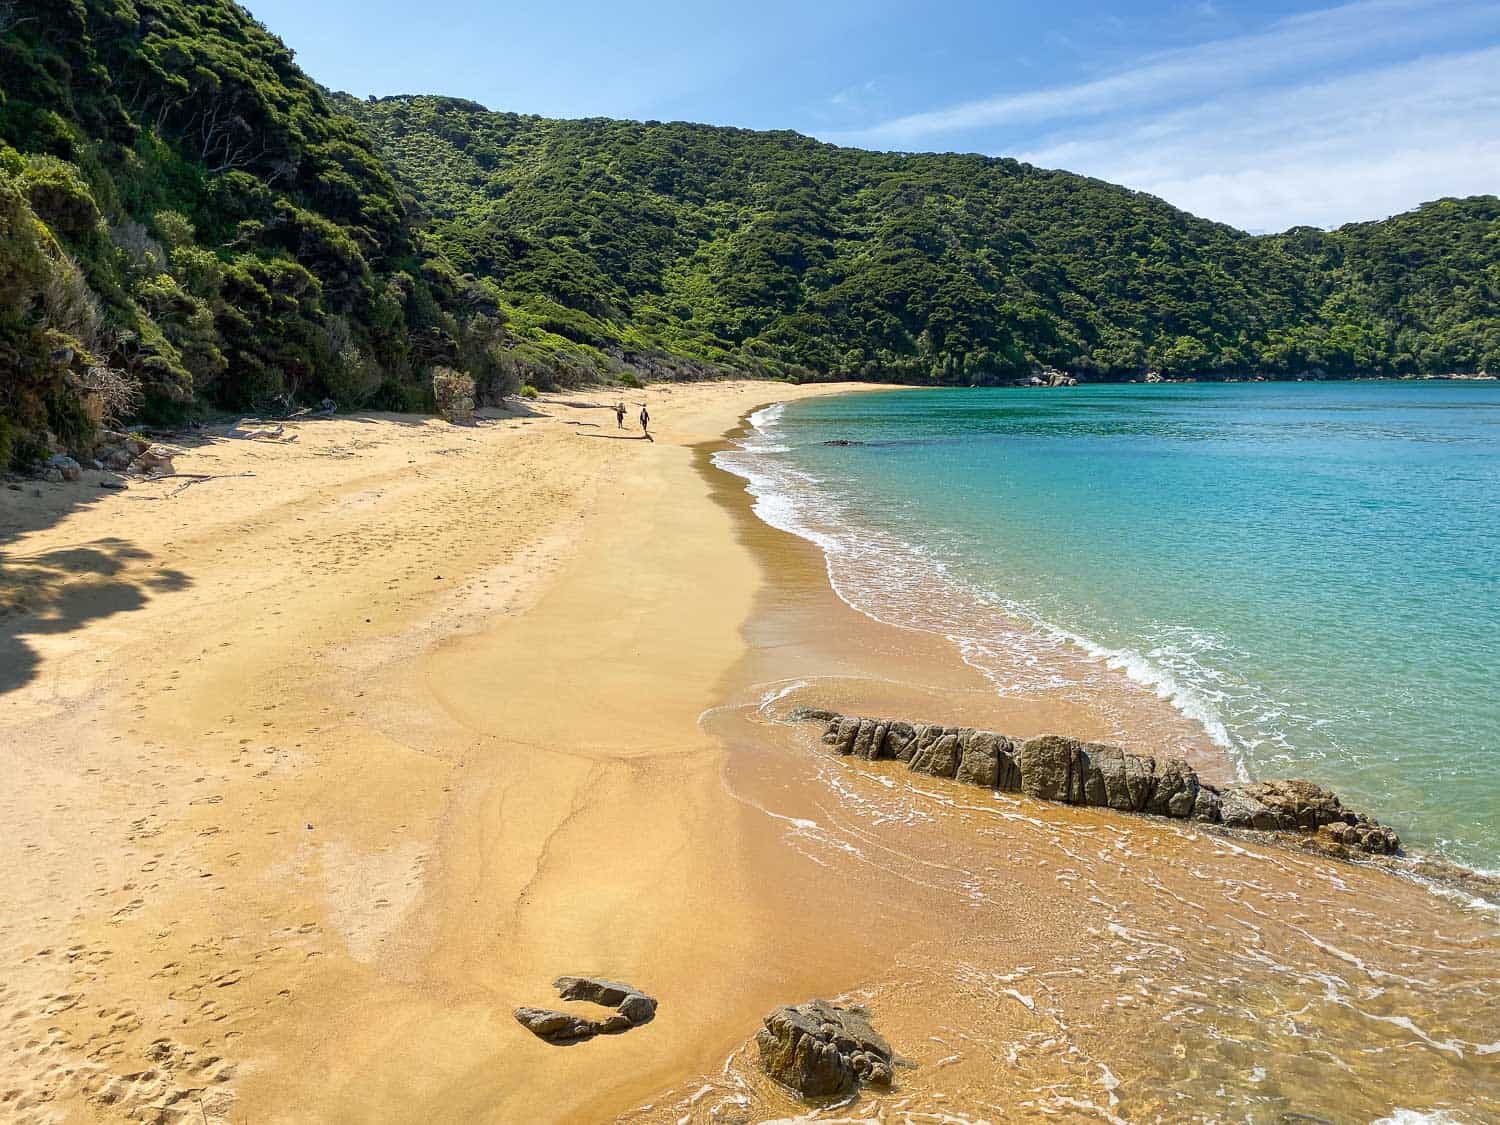 The beach at Mutton Cove, one of the best places to visit on a day trip to Abel Tasman National Park